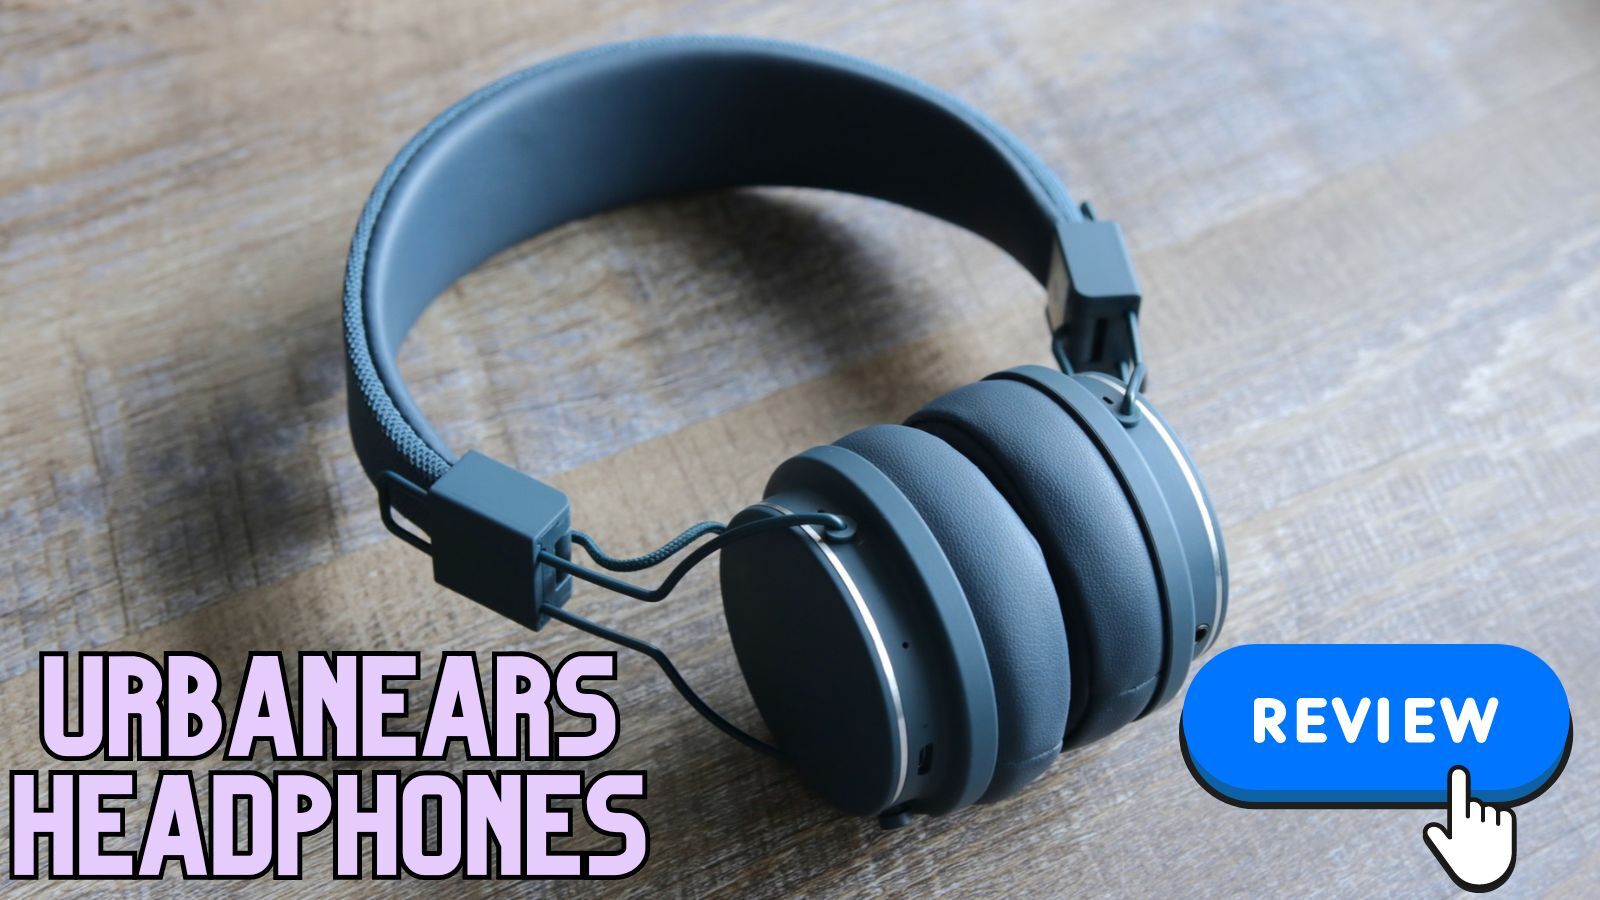 Urbanears Headphones Review: Must Know before Buying!